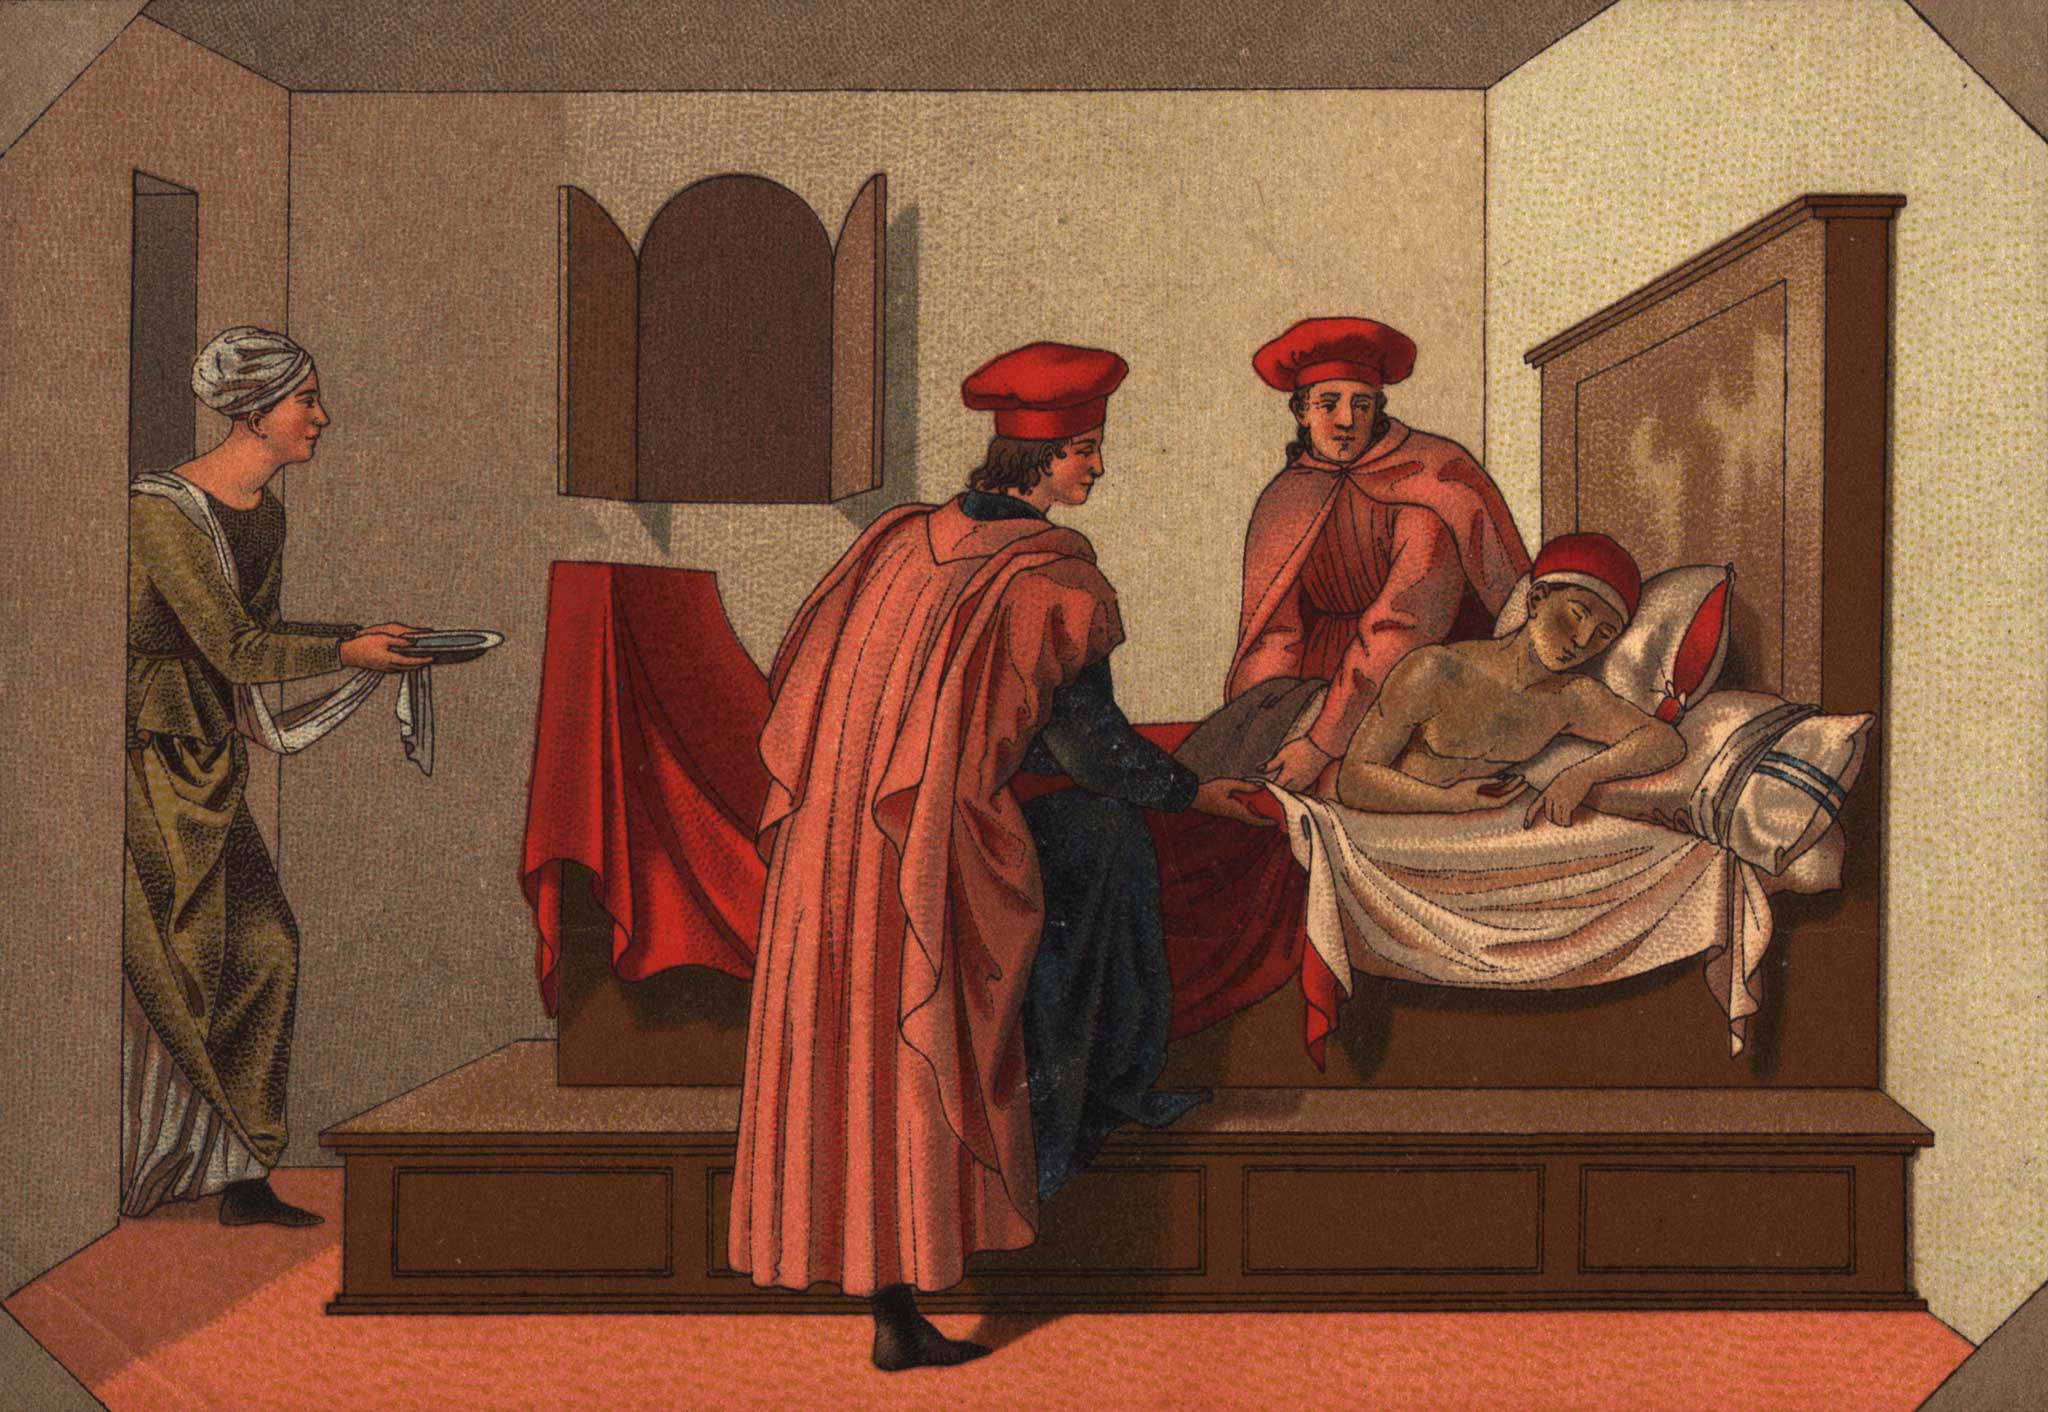 Doctor, doctor!: Healthcare has come a long way since this 1450 scene depicted in 'After Francesco Pesellino'